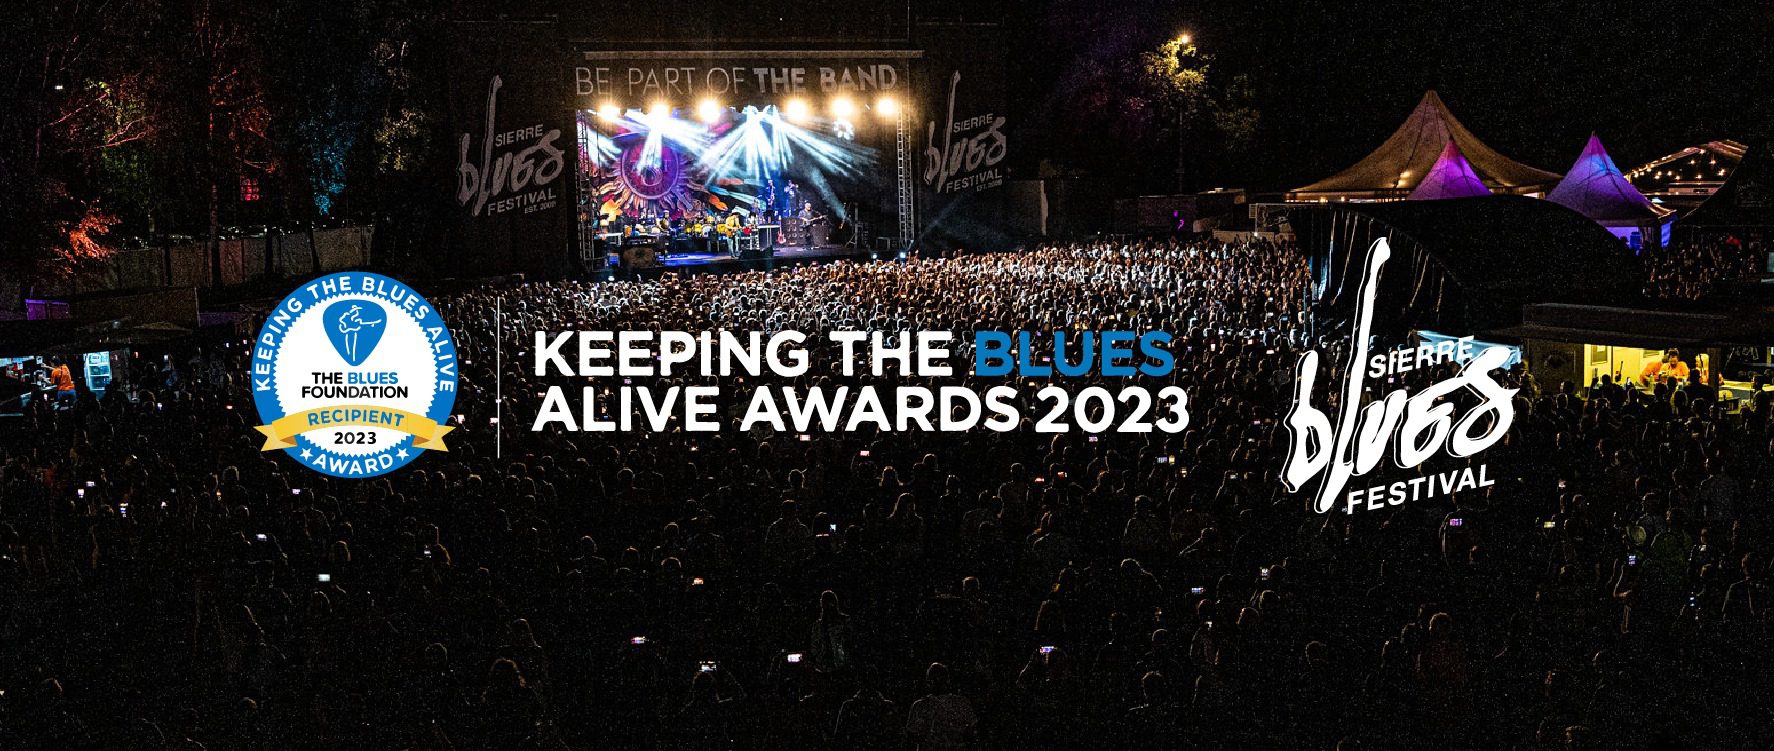 The Sierre Blues Festival is awarded with the prestigious Keeping The Blues Alive Award!